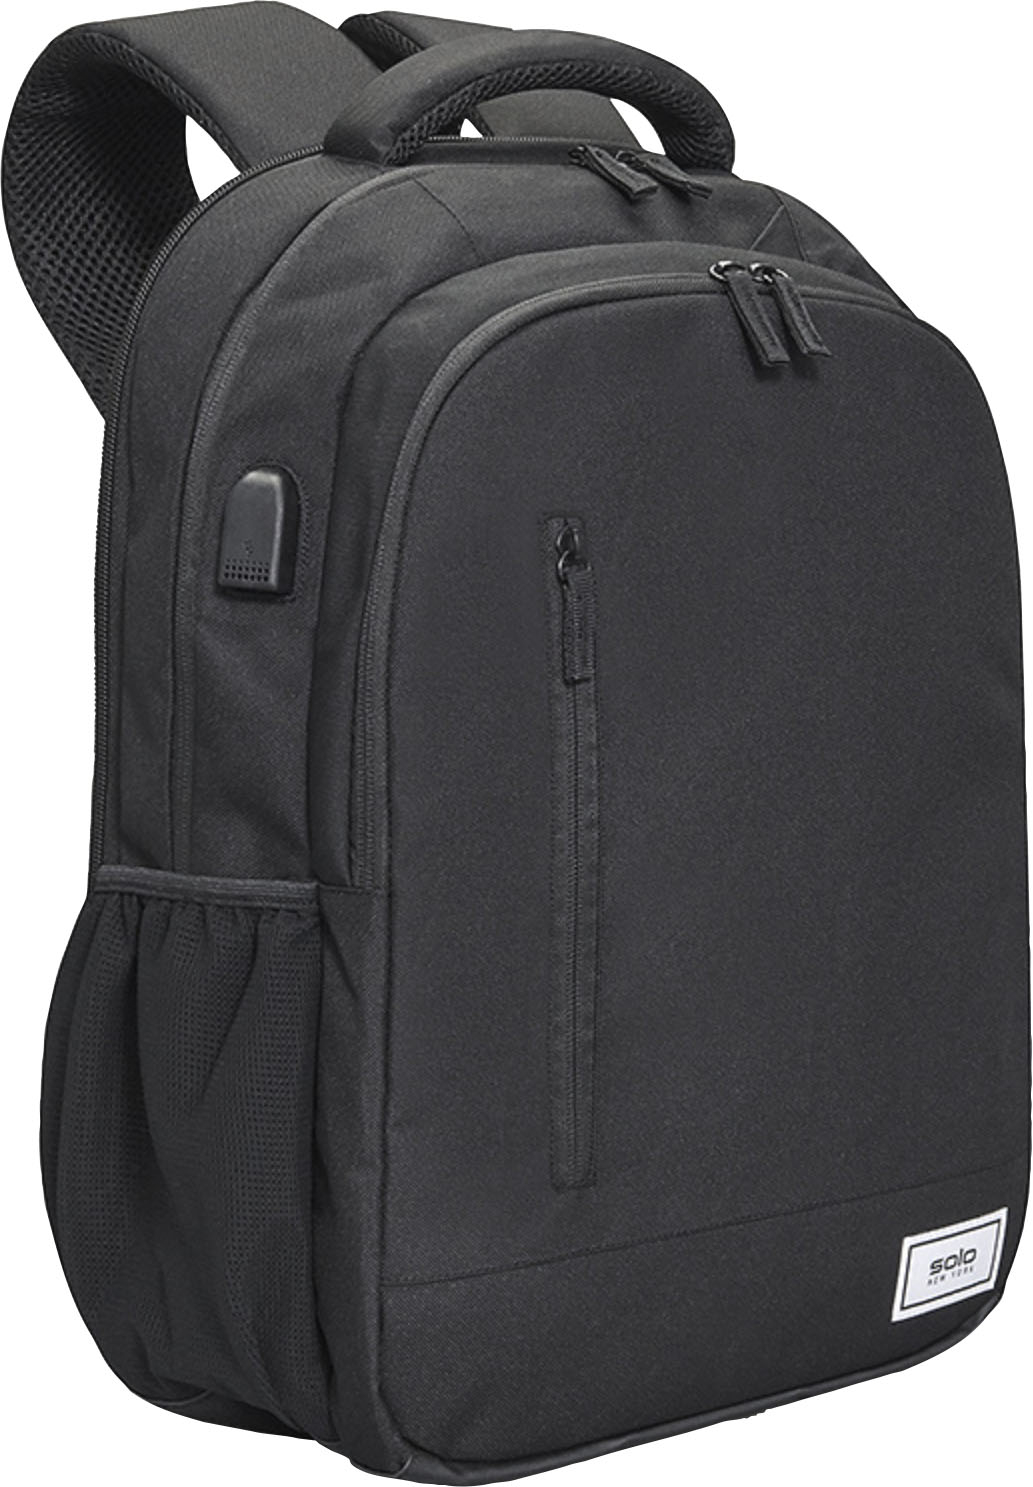 Angle View: Samsonite - Mobile Solution Deluxe Backpack for 15.6" Laptop - Caper Green